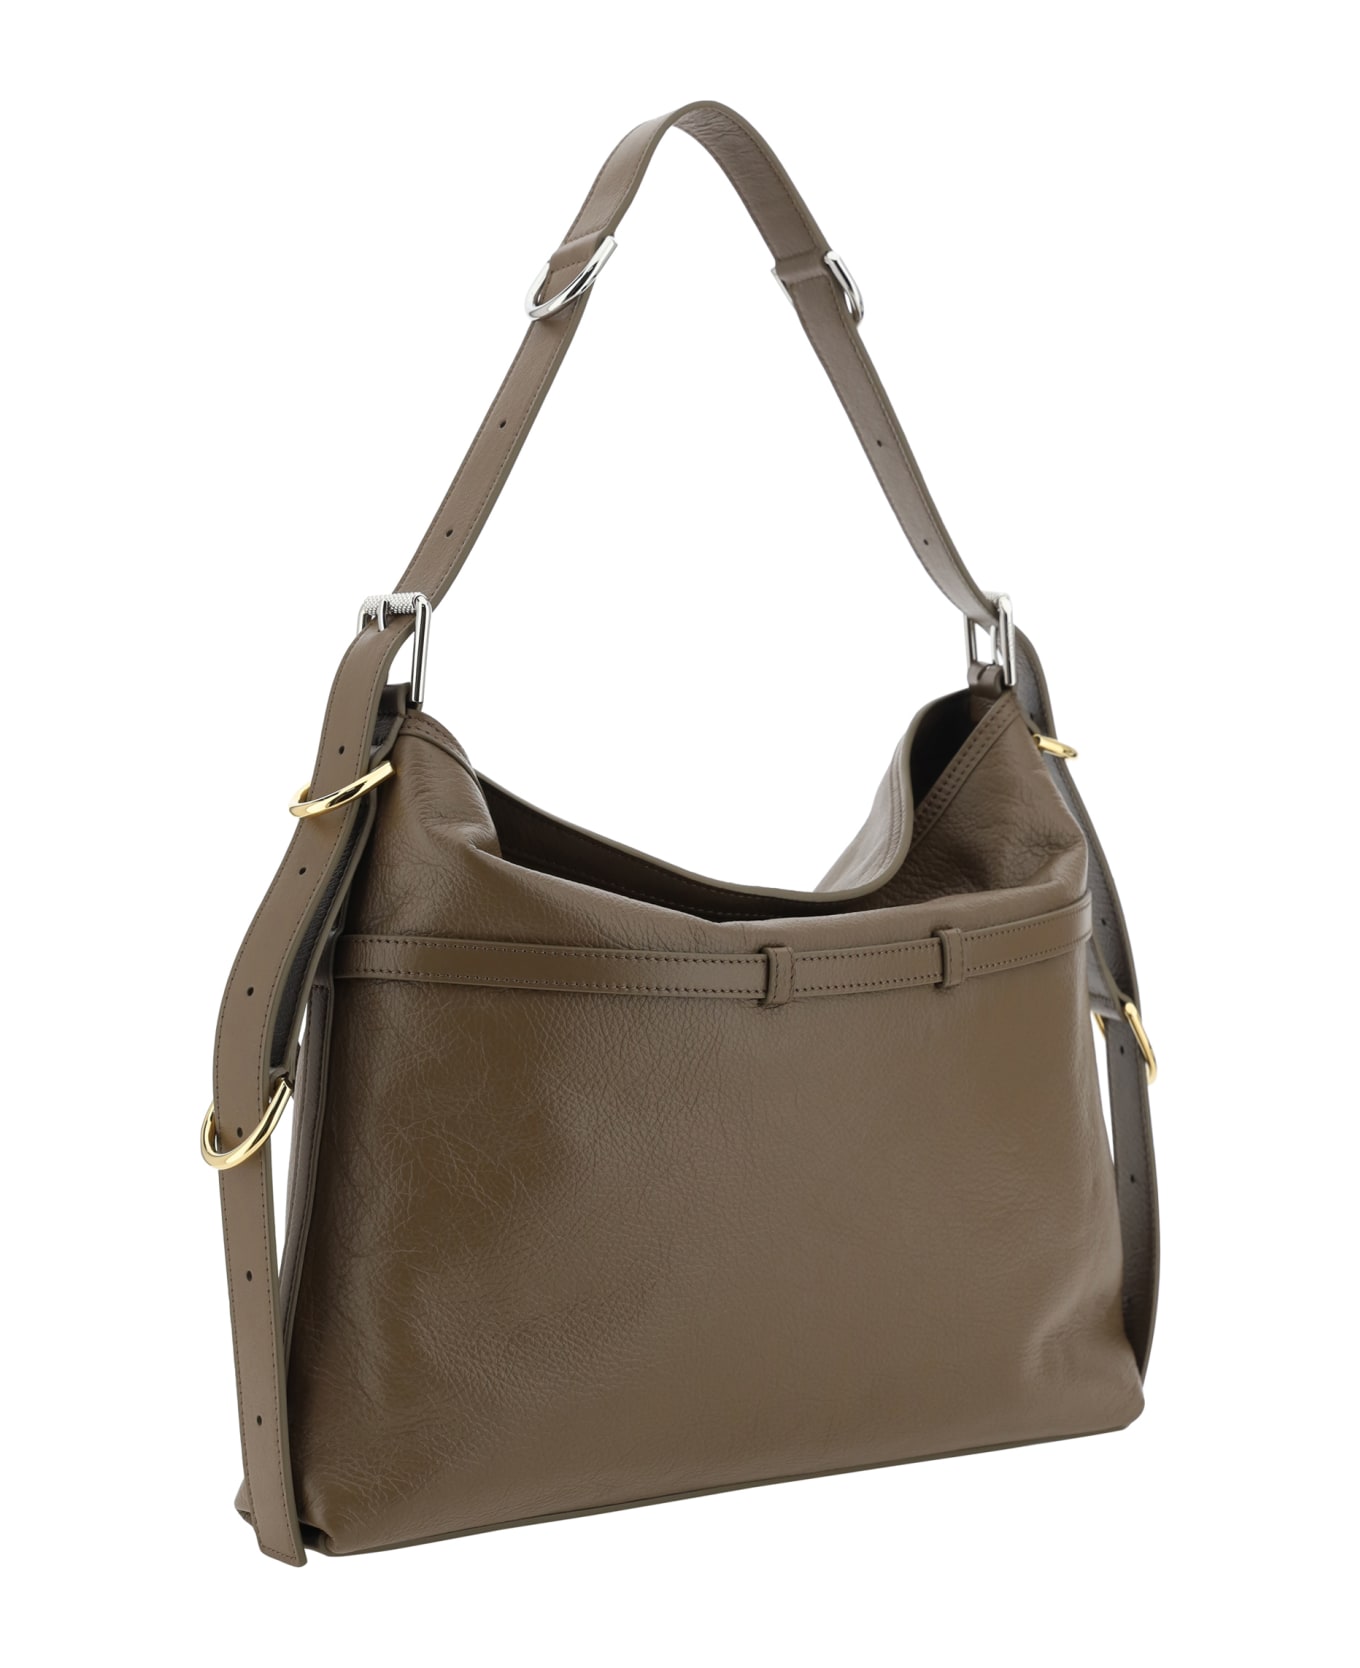 Givenchy Taupe Leather Medium 'voyou' Shoulder Bag - Taupe